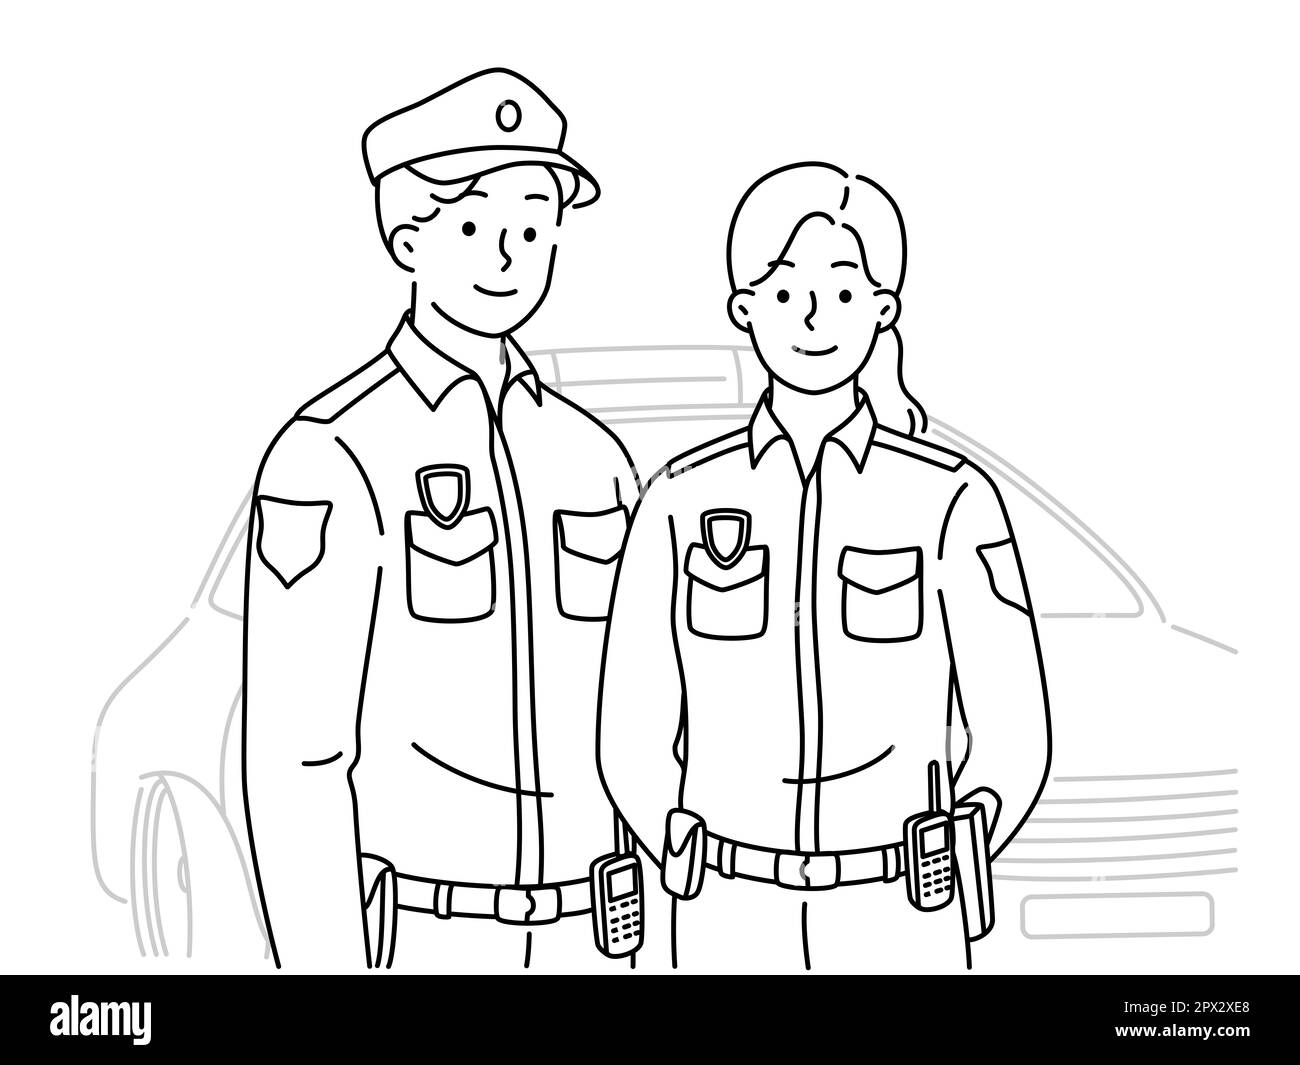 Couple of police employees in uniform standing near car. Officers work as patrol on street. Occupation concept. Vector illustration. Stock Photo